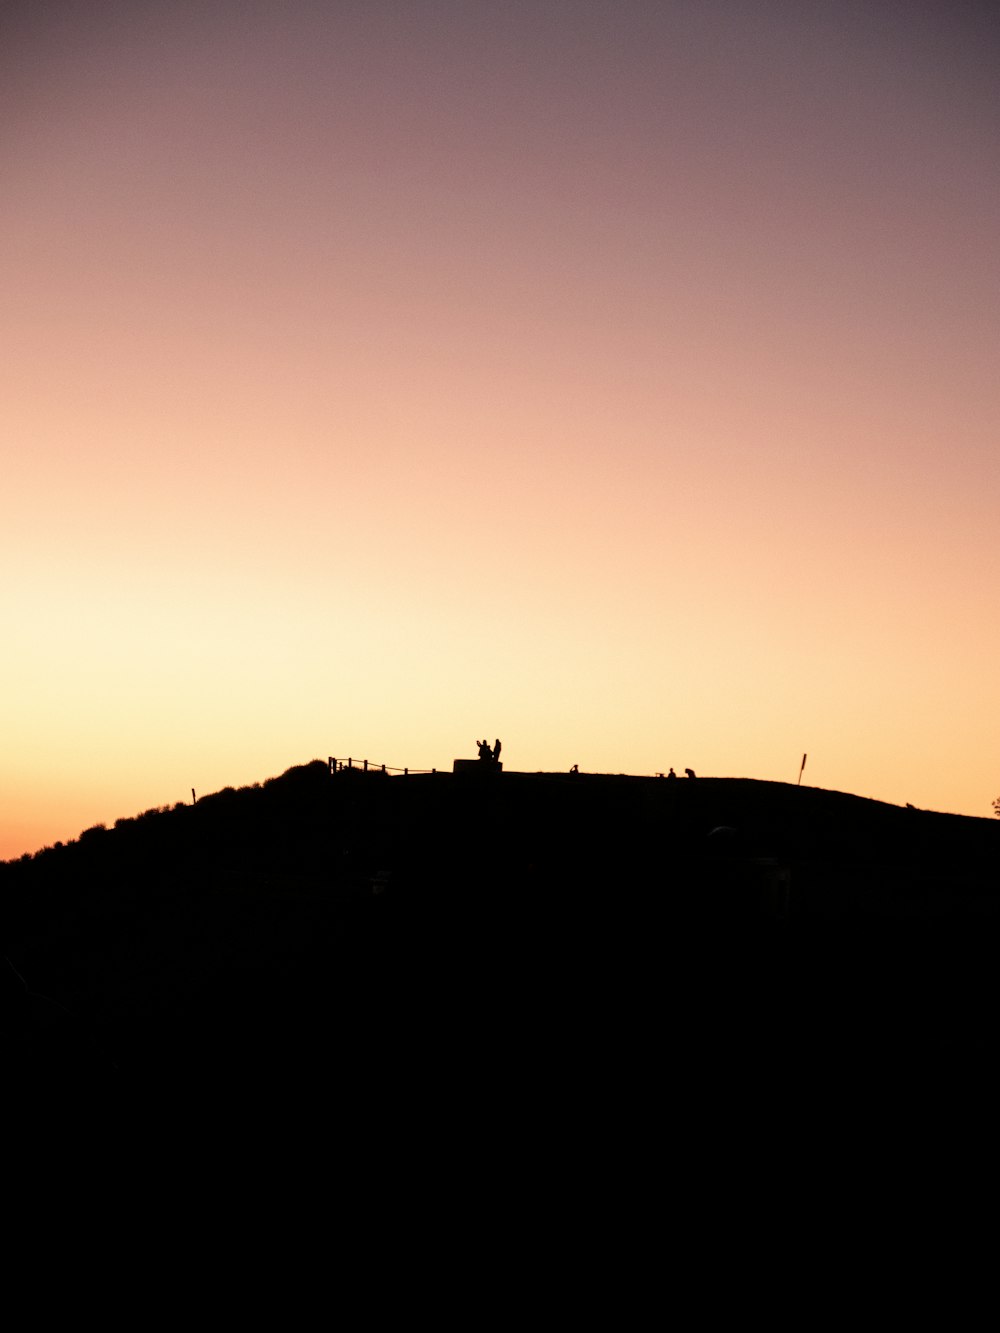 a silhouette of a hill with a person standing on top of it